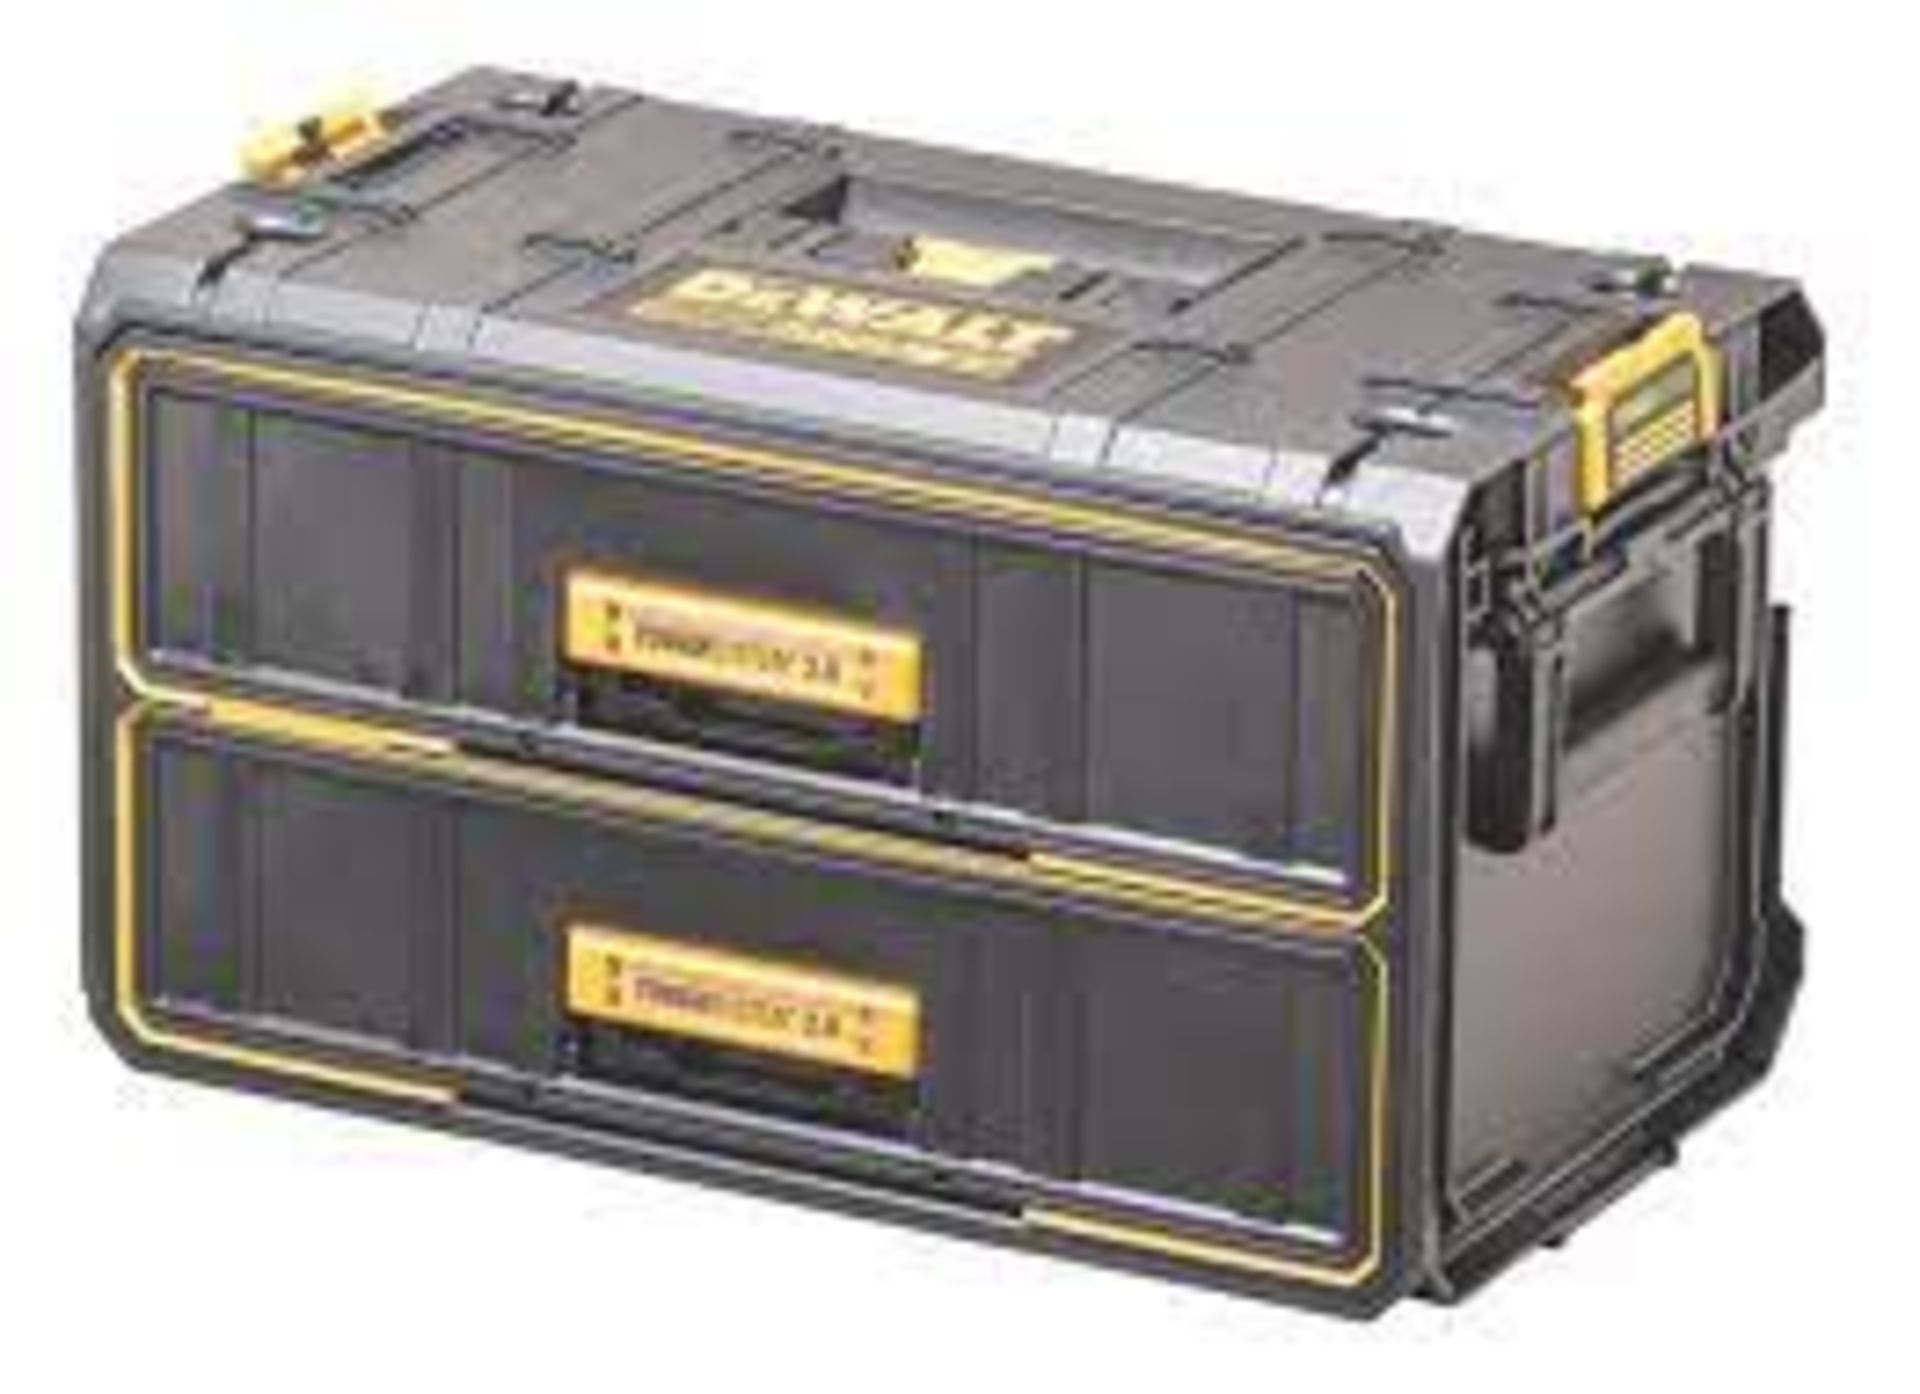 DEWALT TOUGHSYSTEM 2.0 TWIN DRAWER UNIT 13". - SR5. Twin drawers with full compatibility with the